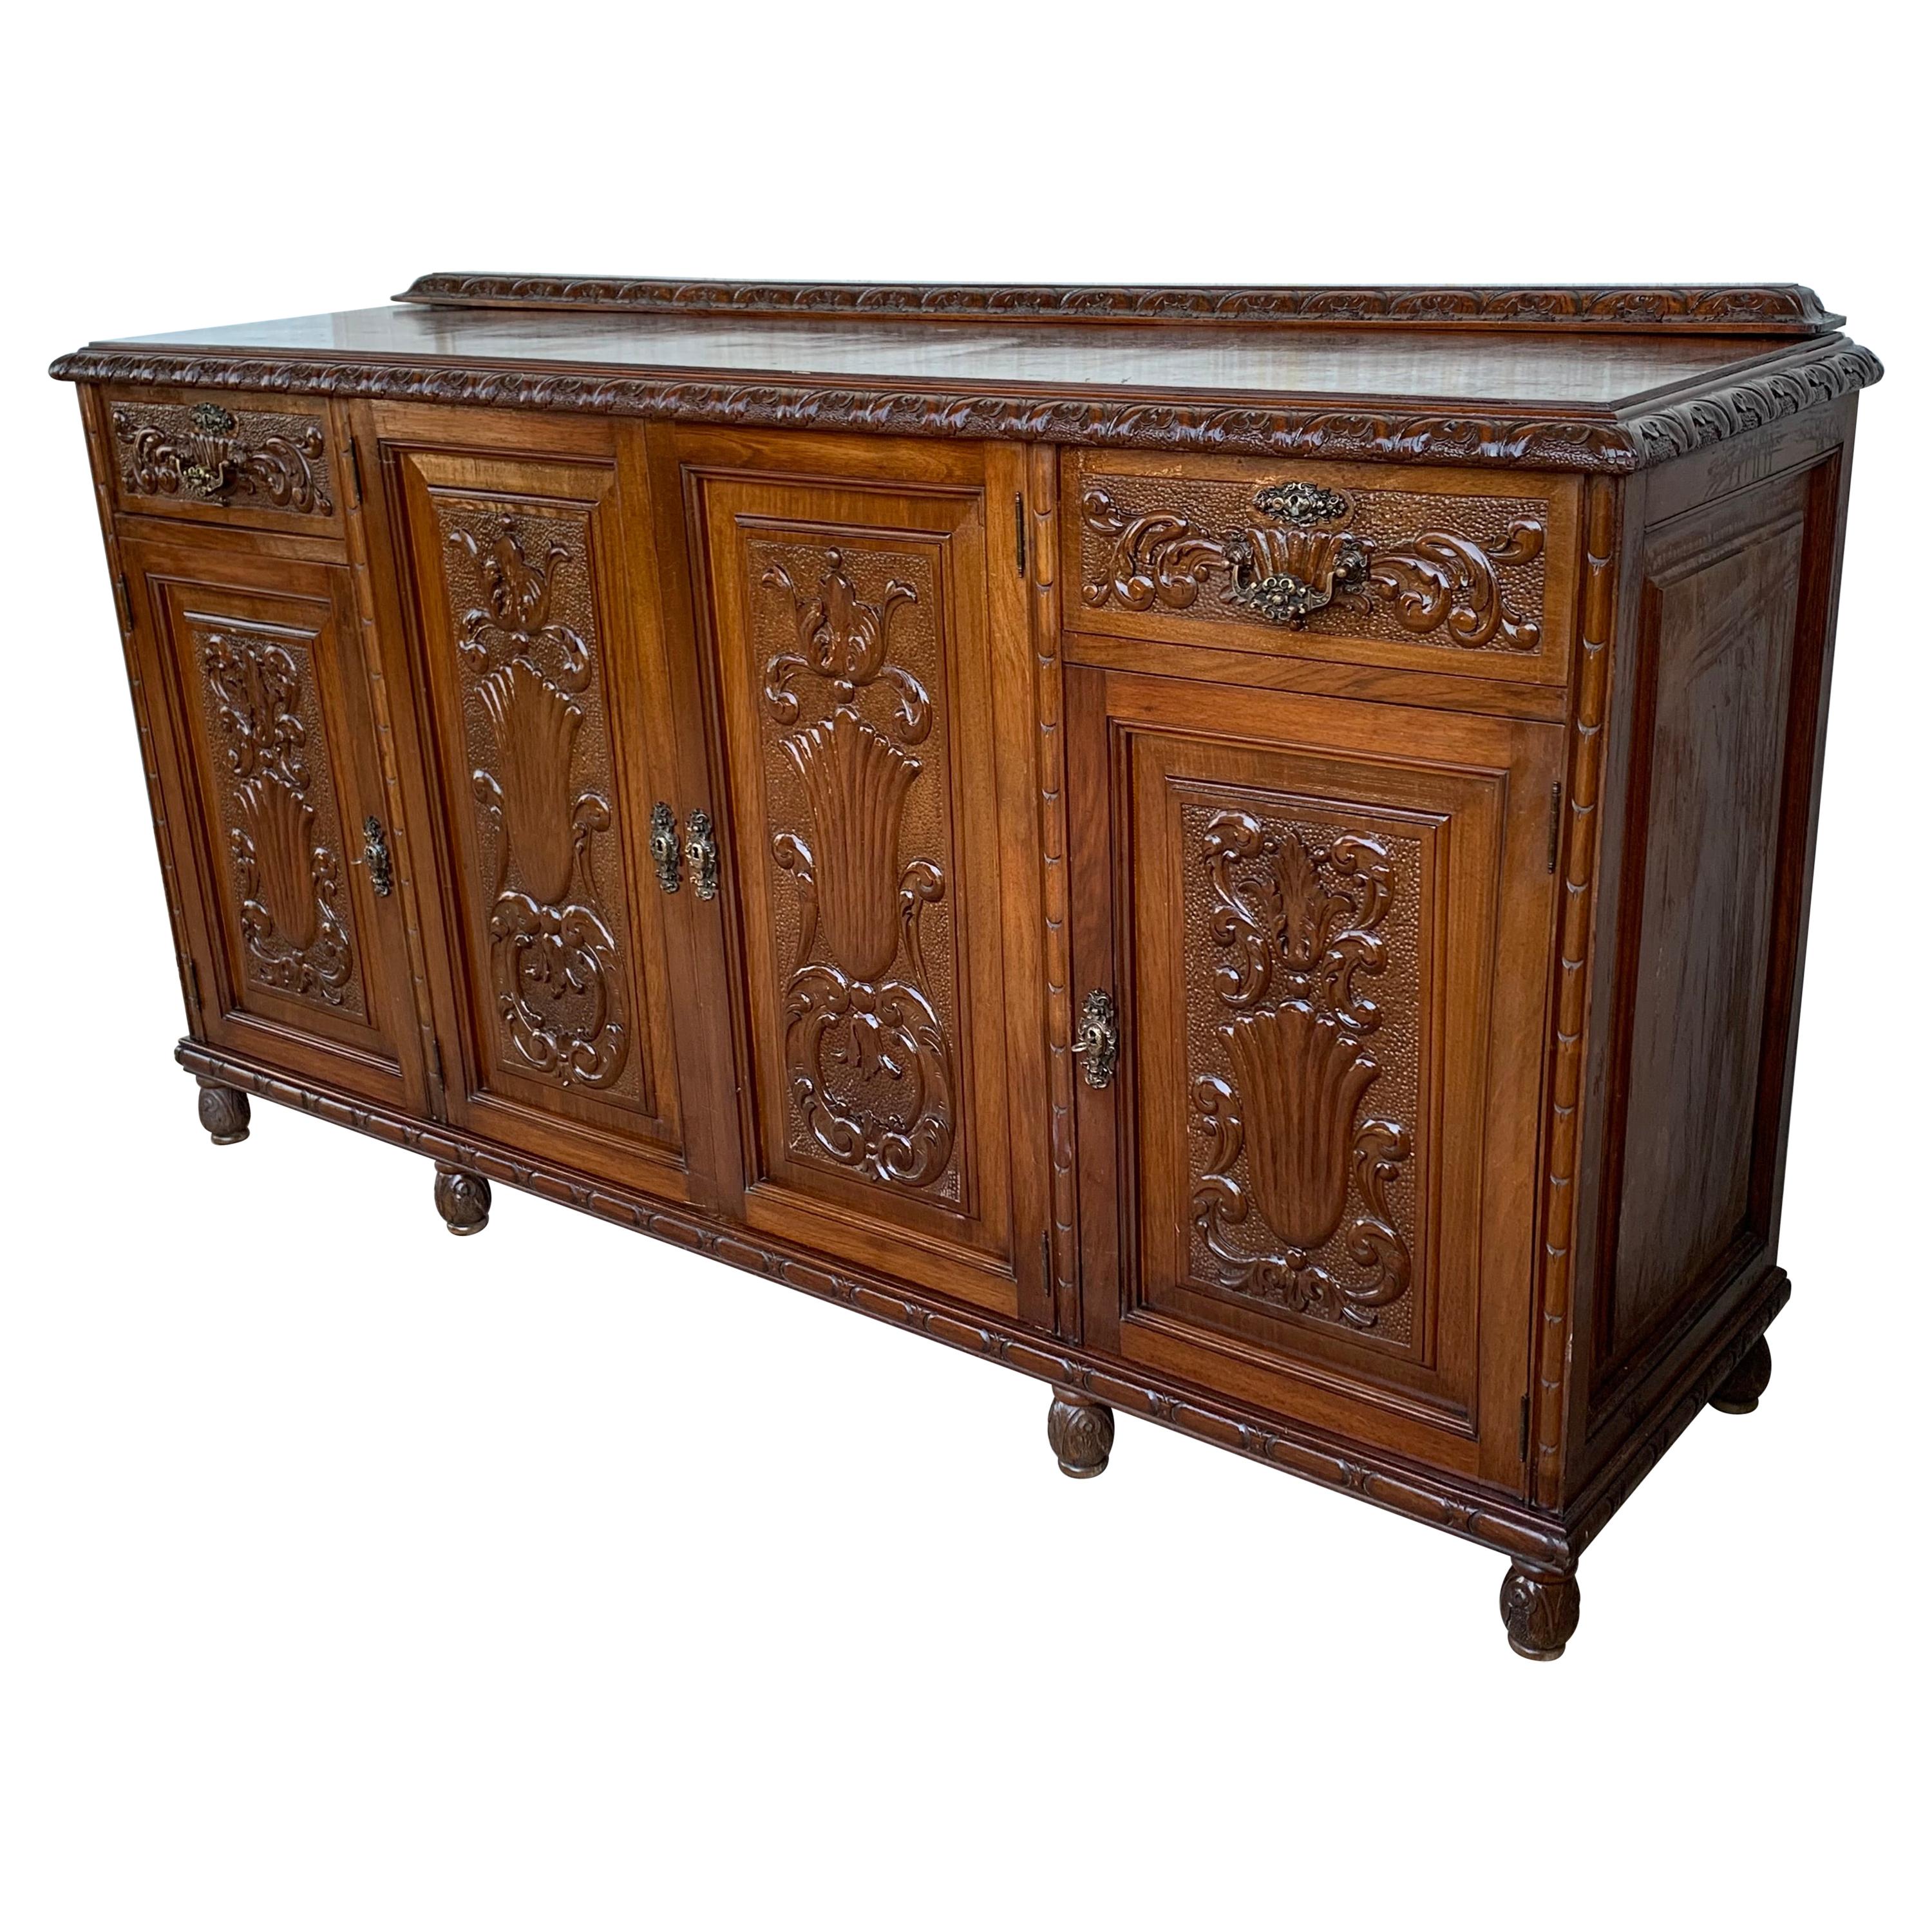 Early 20th Carved Walnut Sideboard with Four Doors and Two Drawers and Crest